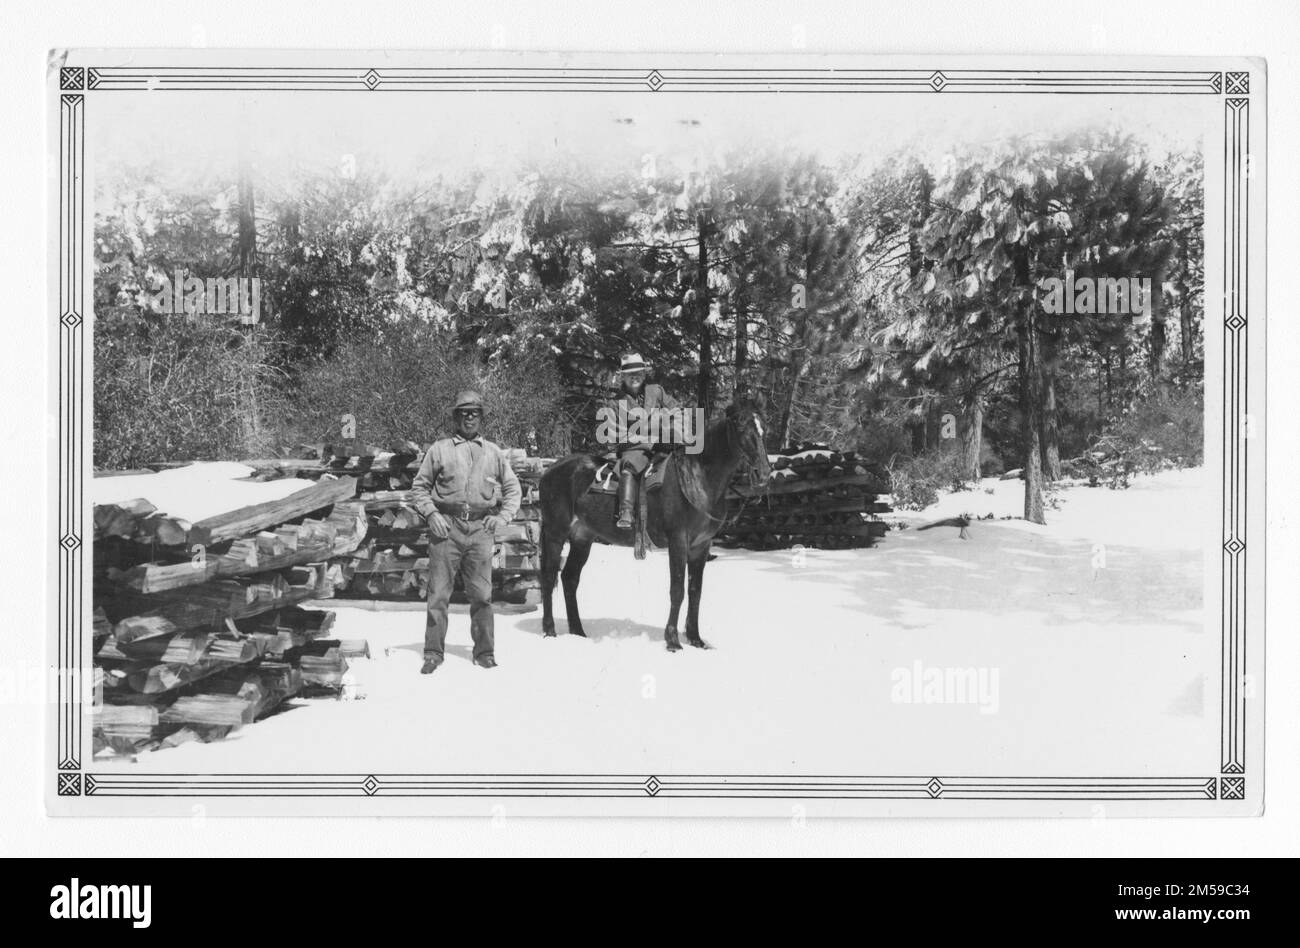 Original caption: 'ECW. Pala. Fence post project.'. 1936 - 1942. Pacific Region (Riverside, CA). Photographic Print. Department of the Interior. Office of Indian Affairs. Mission Agency. 11/15/1920-6/17/1946. Photographs Stock Photo